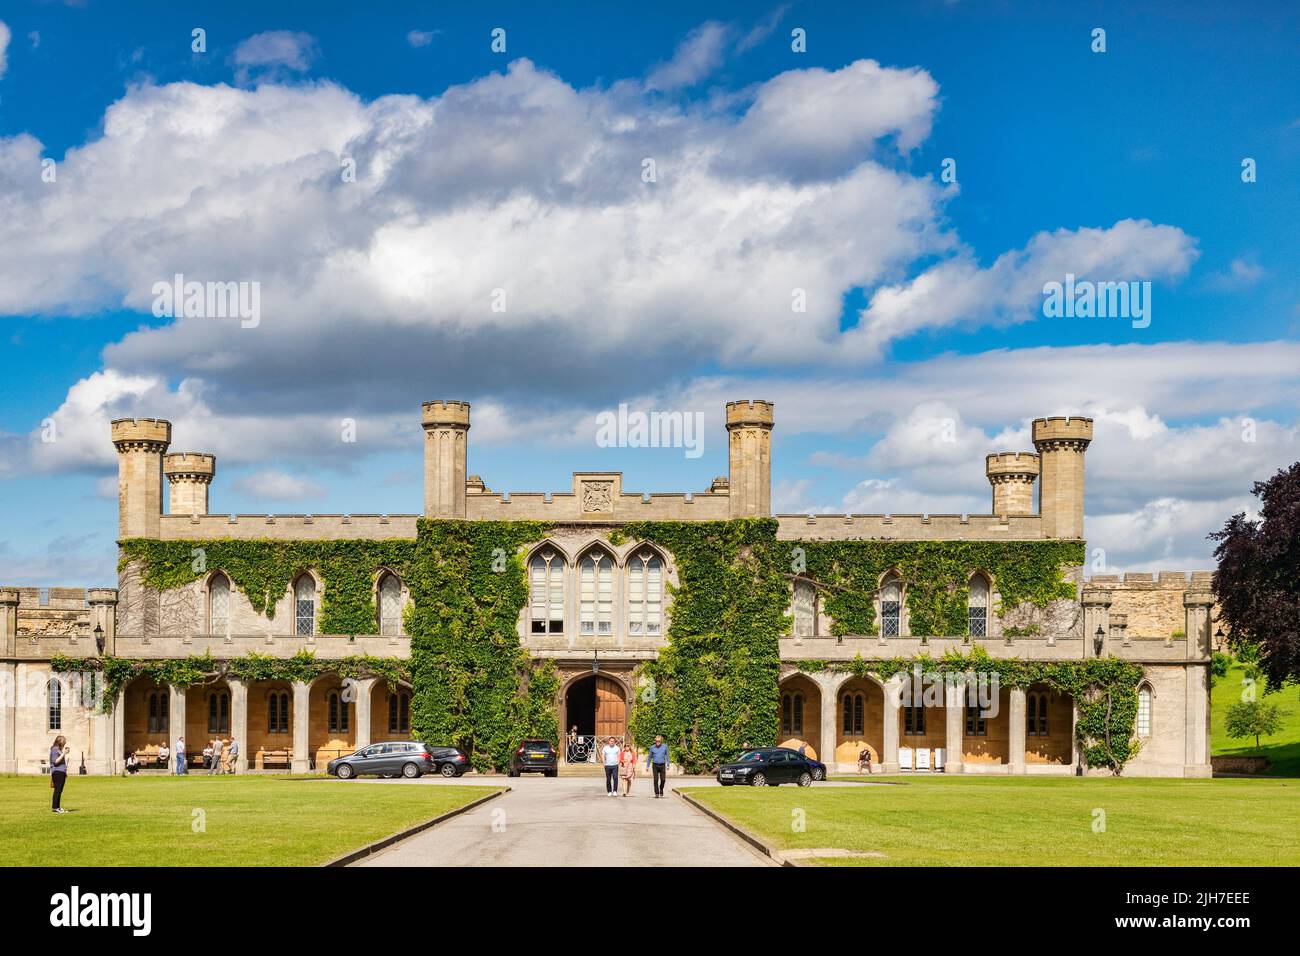 2 July 2019: Lincoln, UK - The Crown Court, in the grounds of Lincoln Castle, with people outside and tourists sightseeing. Stock Photo